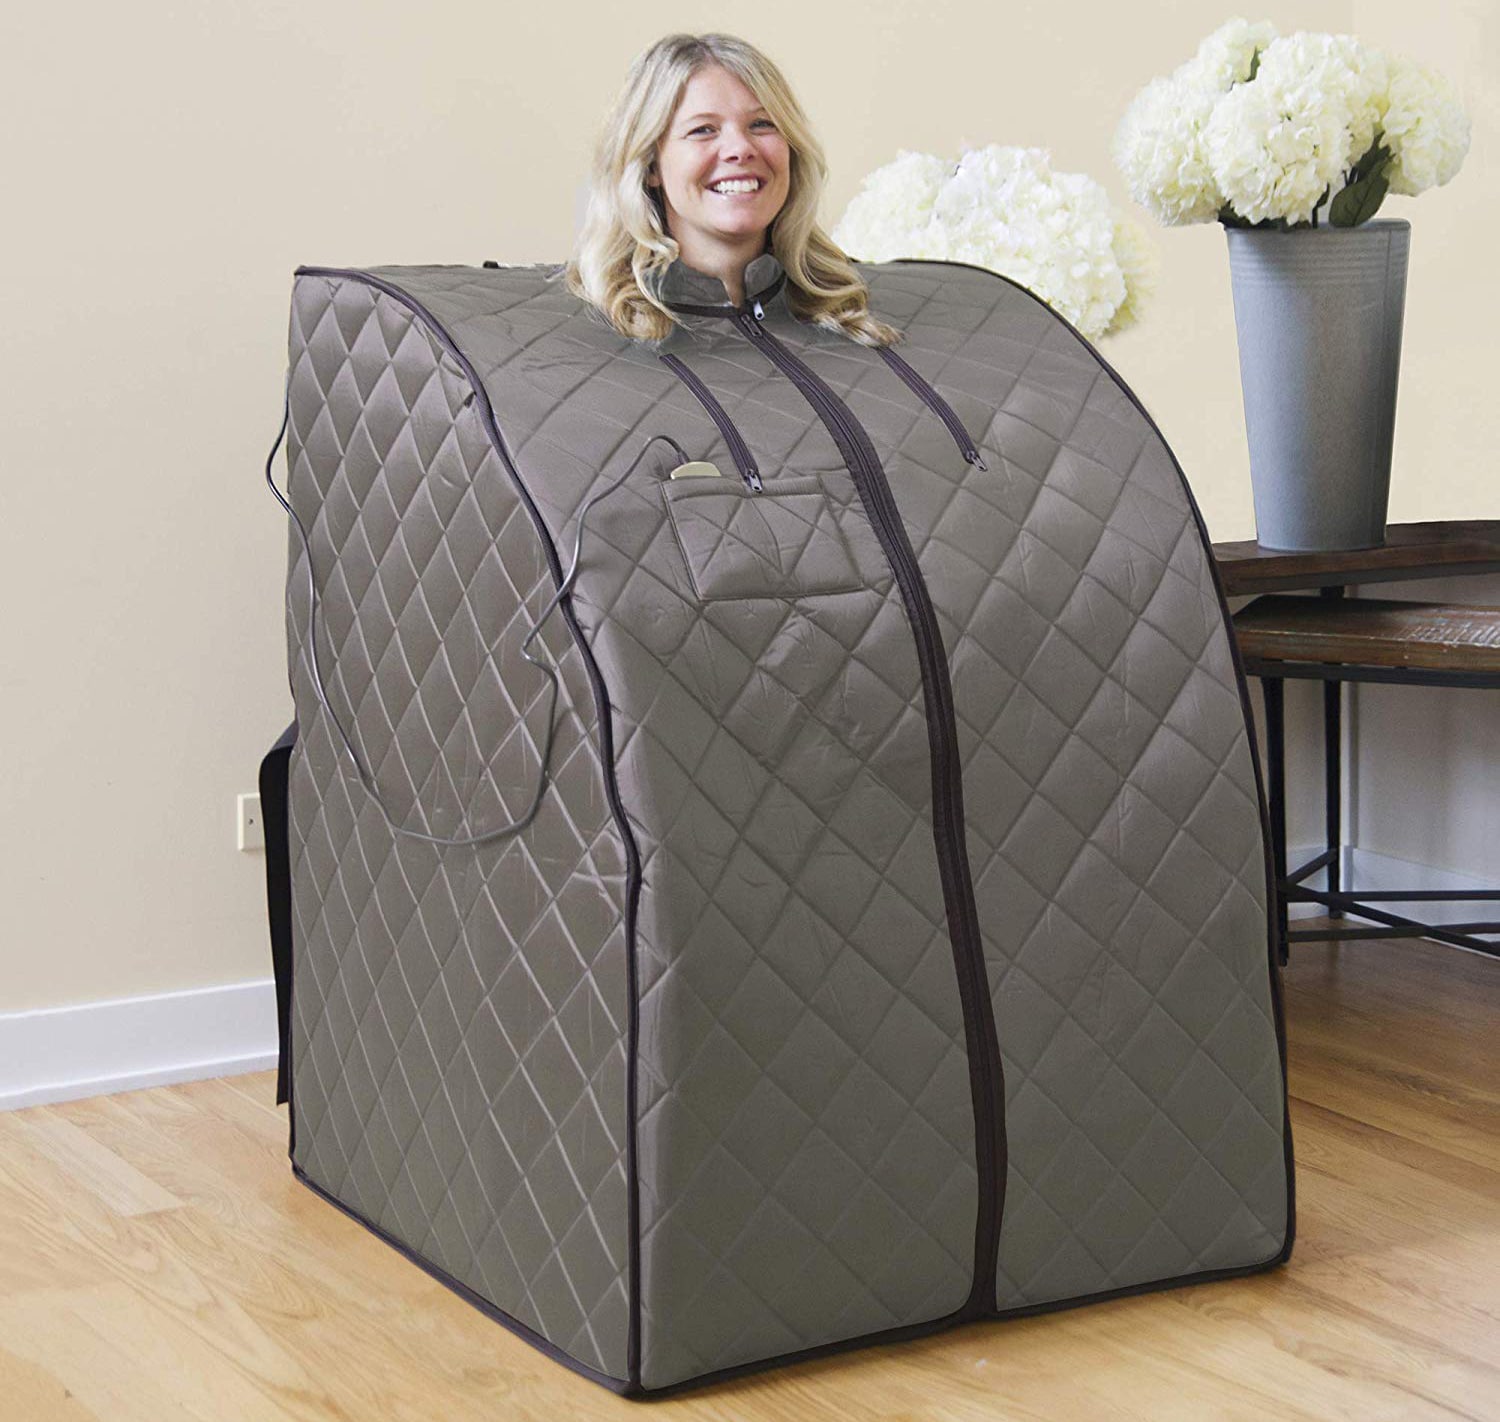 Top 10 Best Portable Home Saunas in 2021 Reviews | Guide